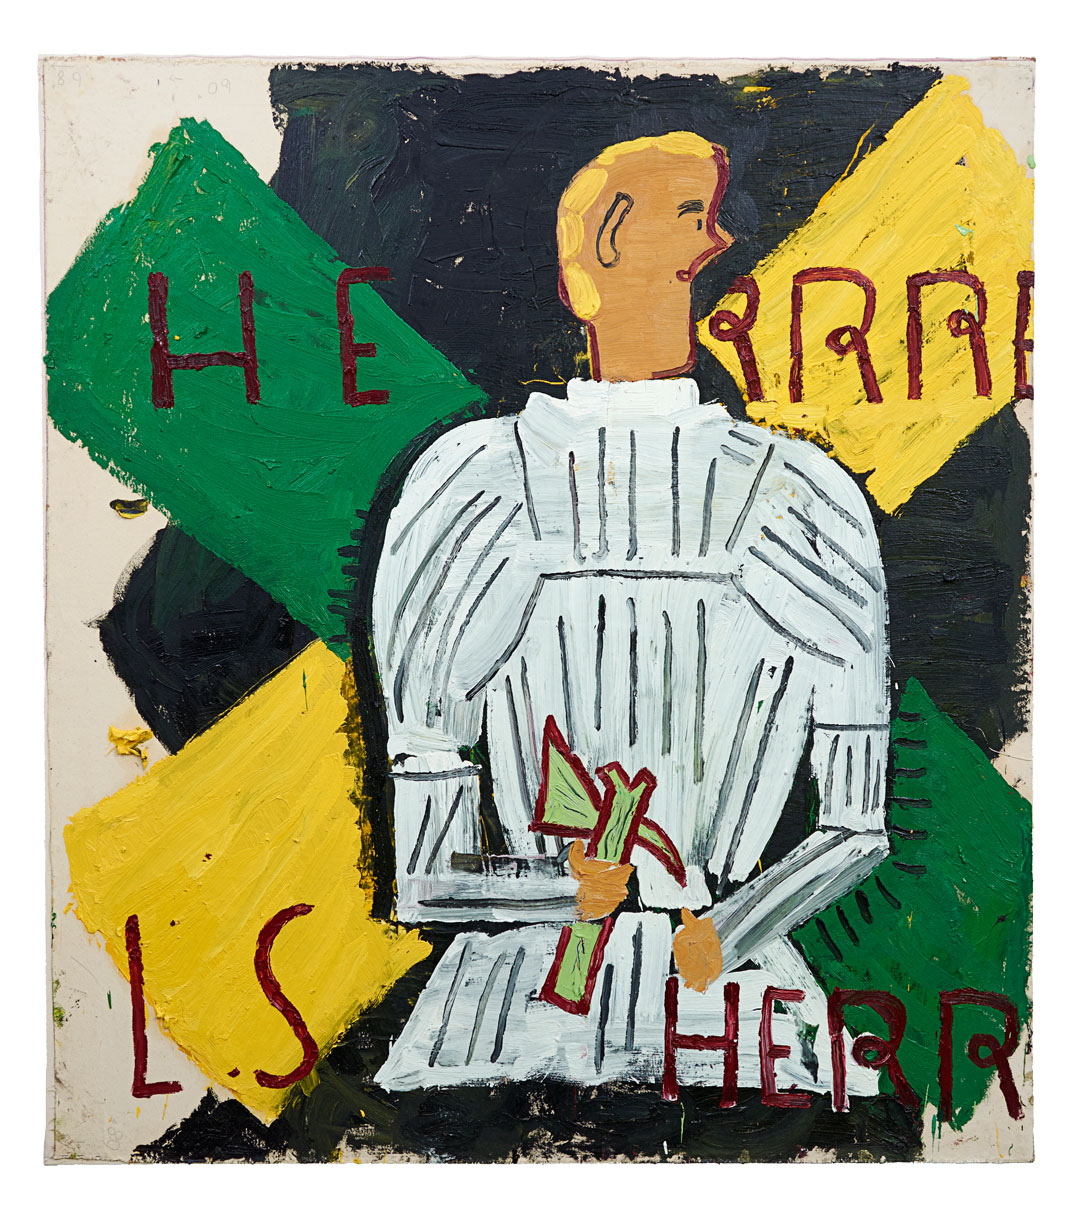 Herr Rehlinger in White Armour (2014) by Rose Wylie. As reproduced in Vitamin P3